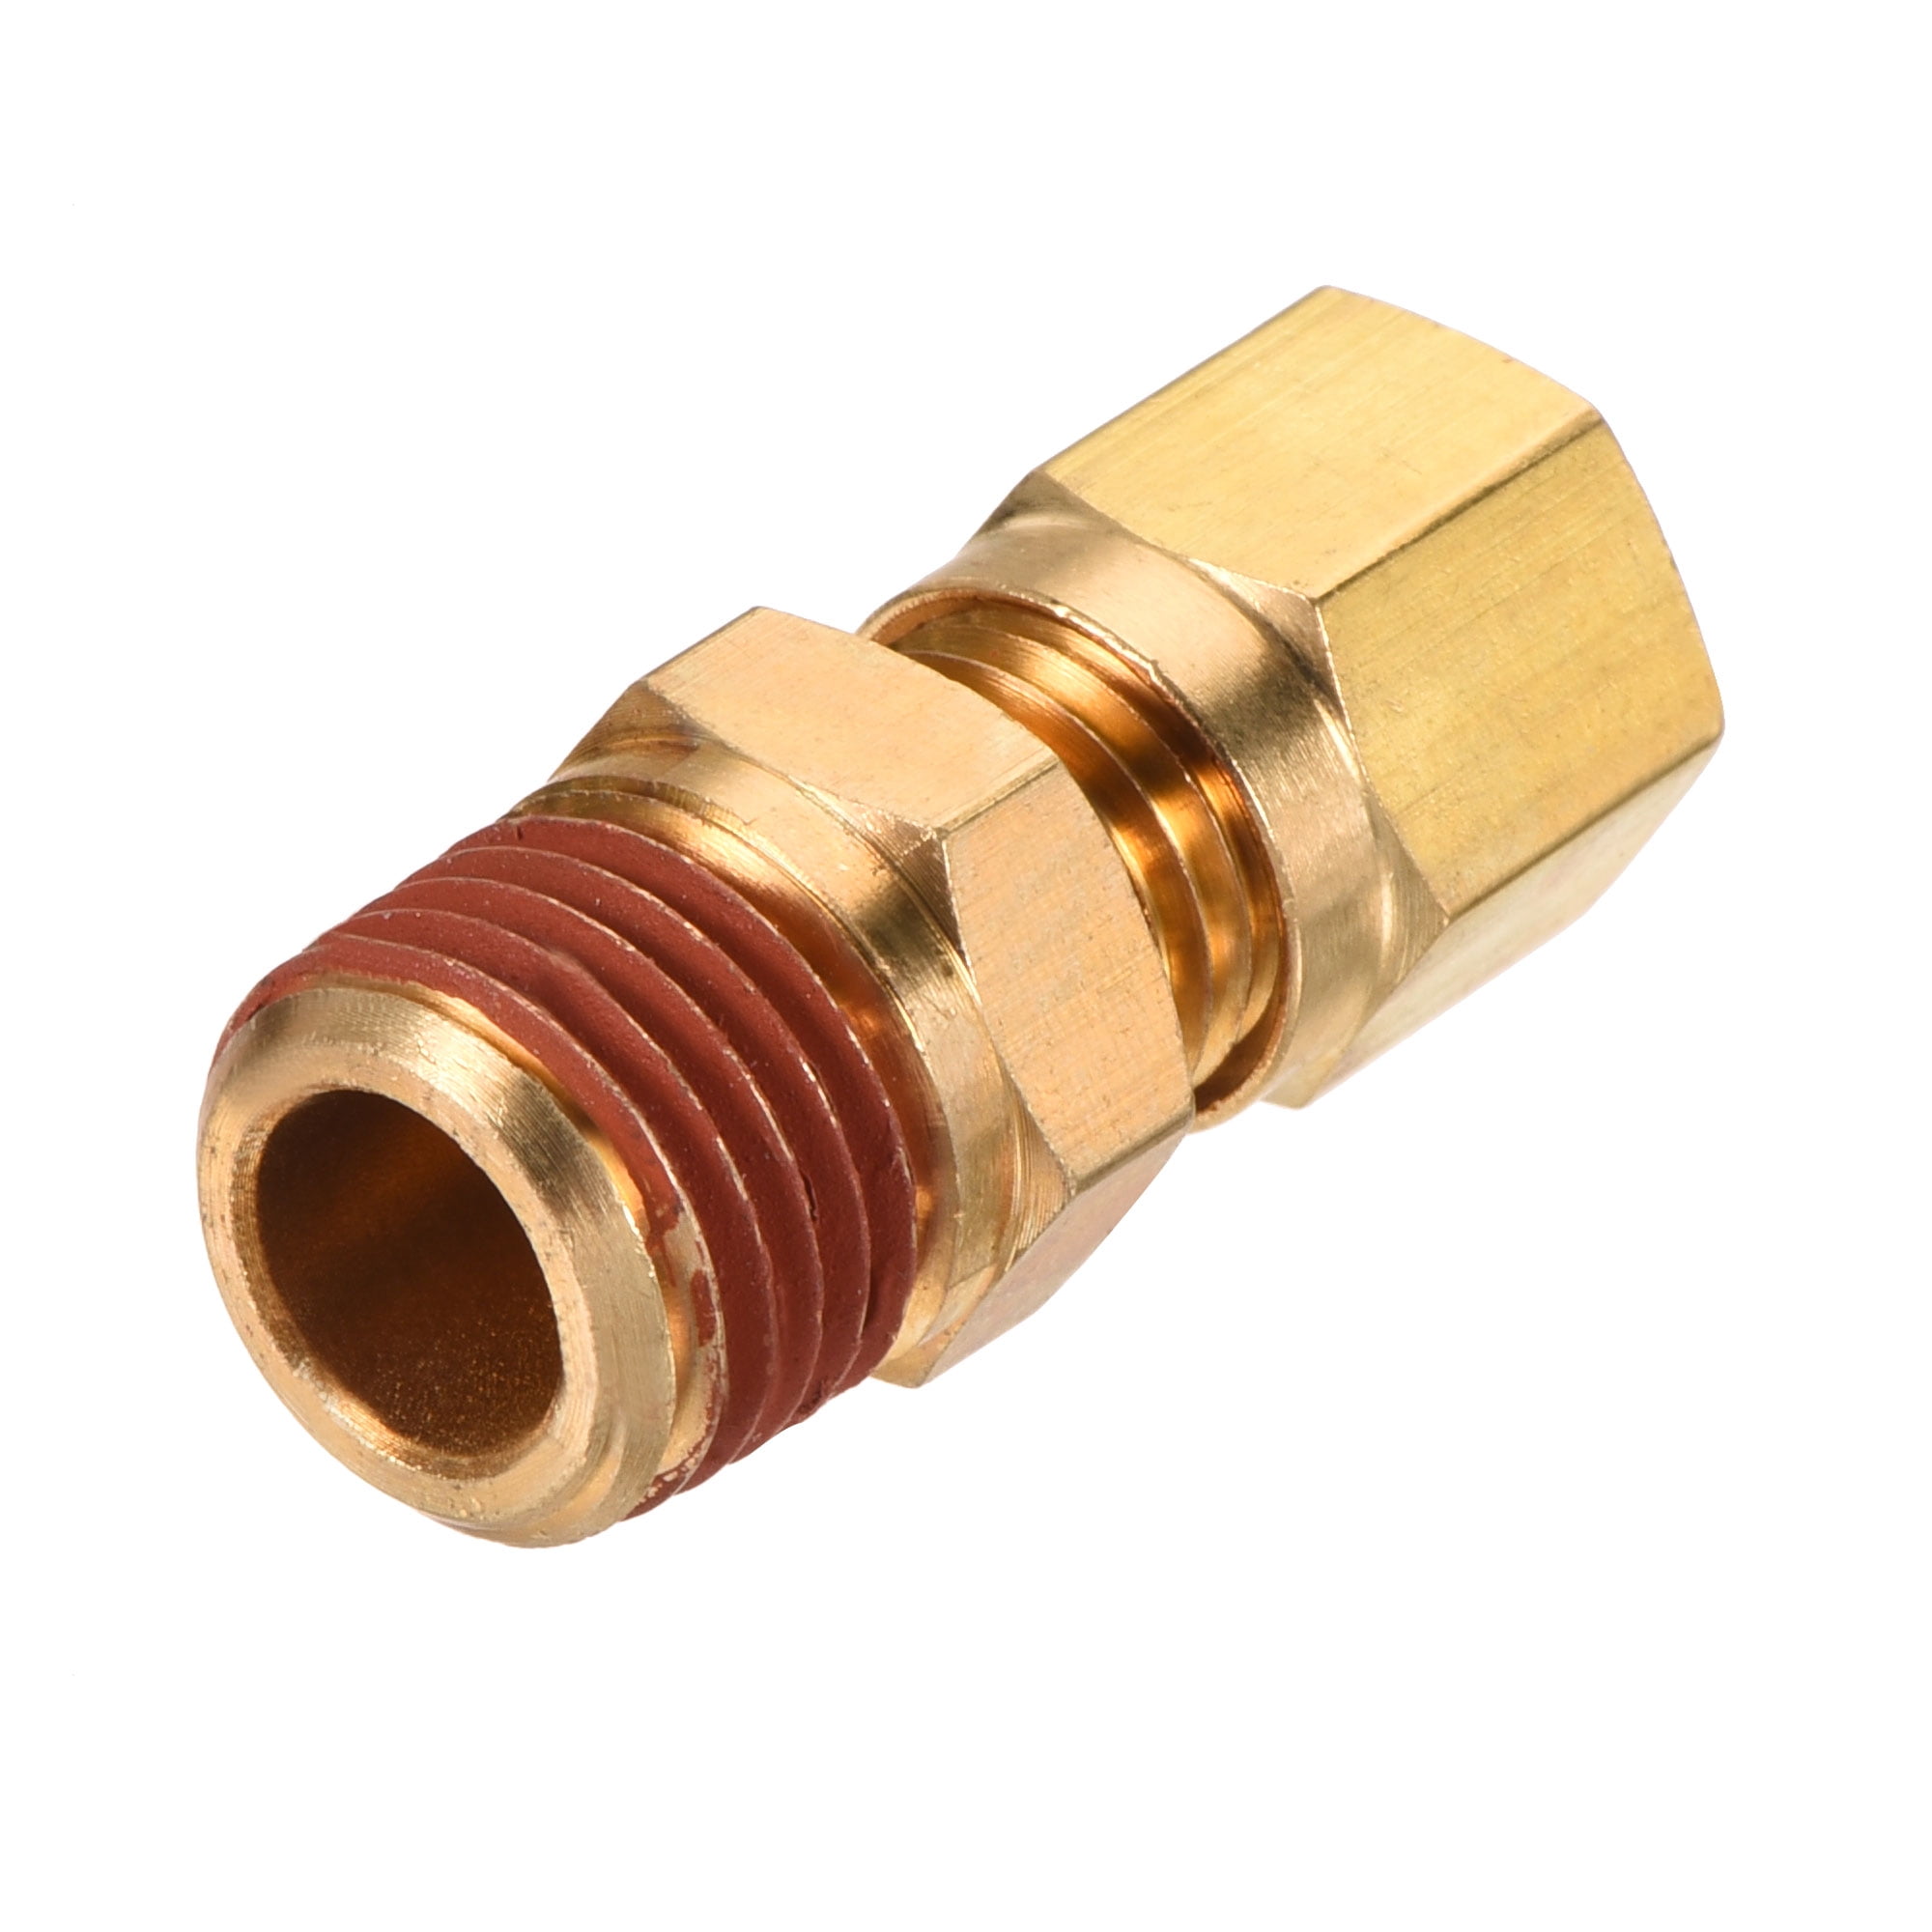 Uxcell Brass Compression Tube Fitting 1/4NPT x 1/4 Tube OD Straight  Coupling Adapter 